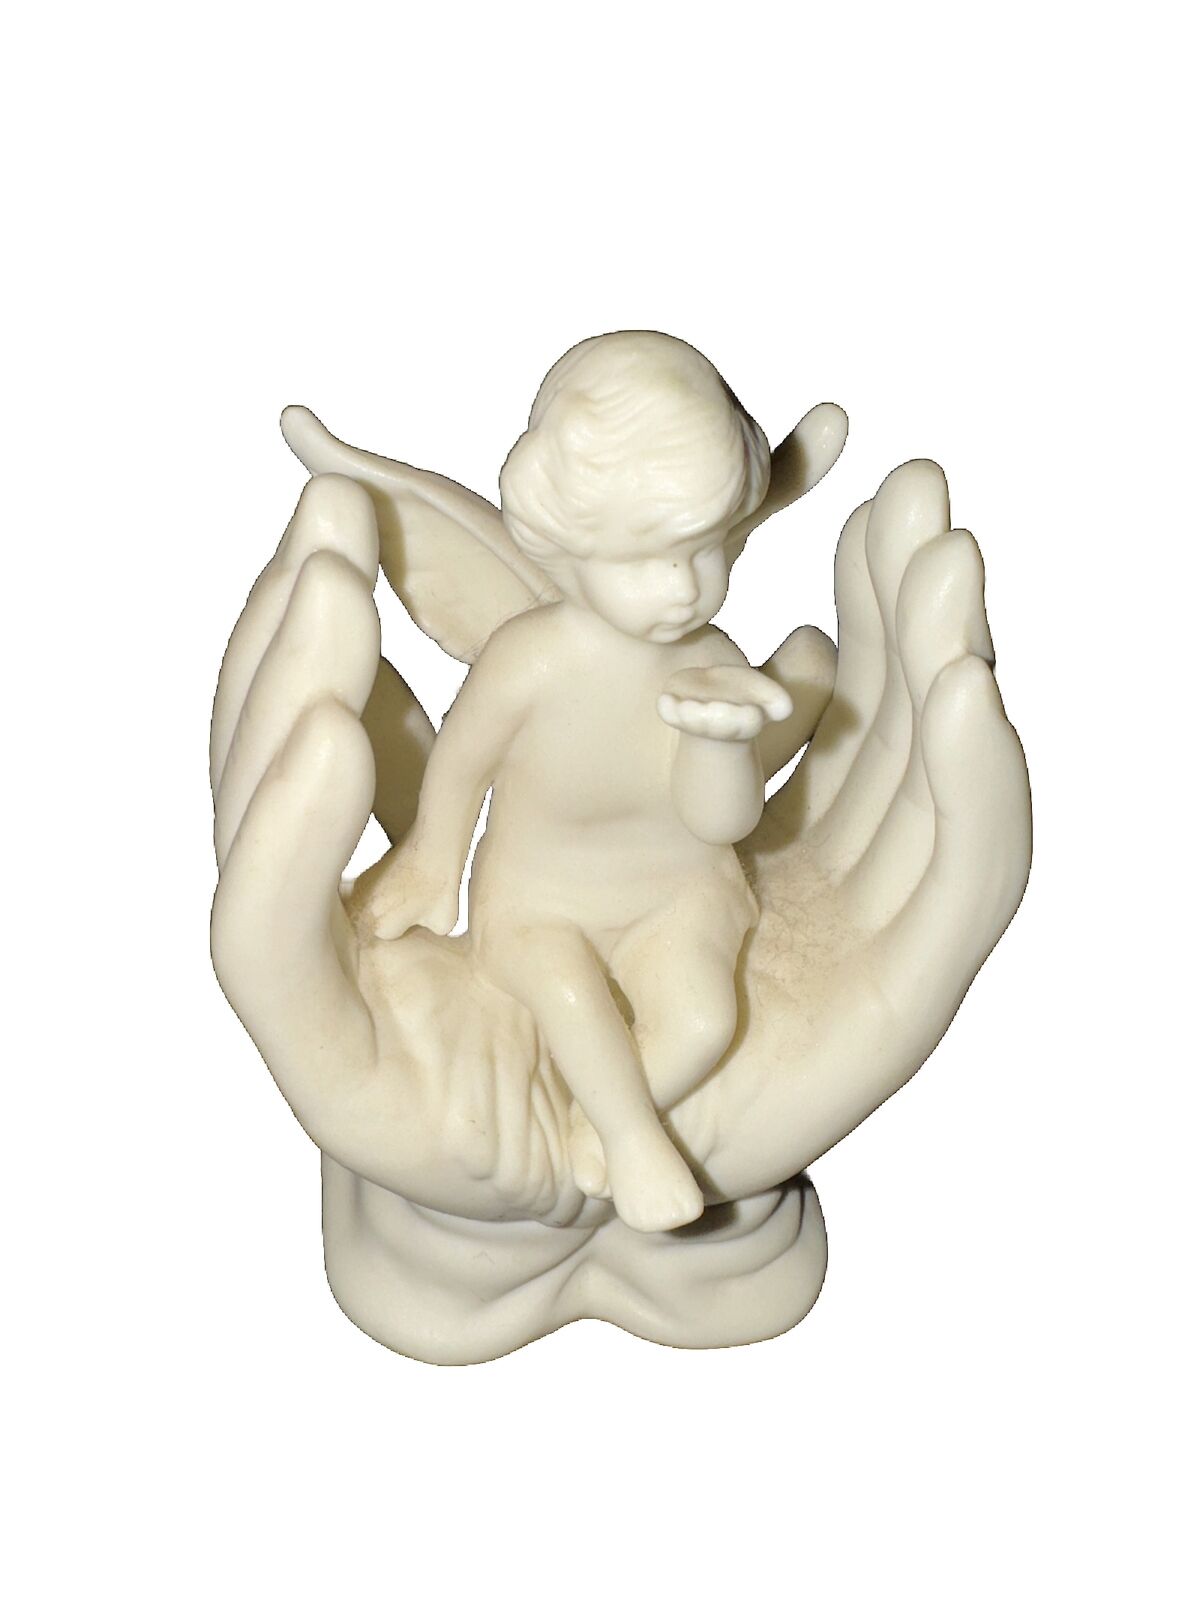 Gods Praying Hand with Angel Blowing a Kiss 4.5” Tall